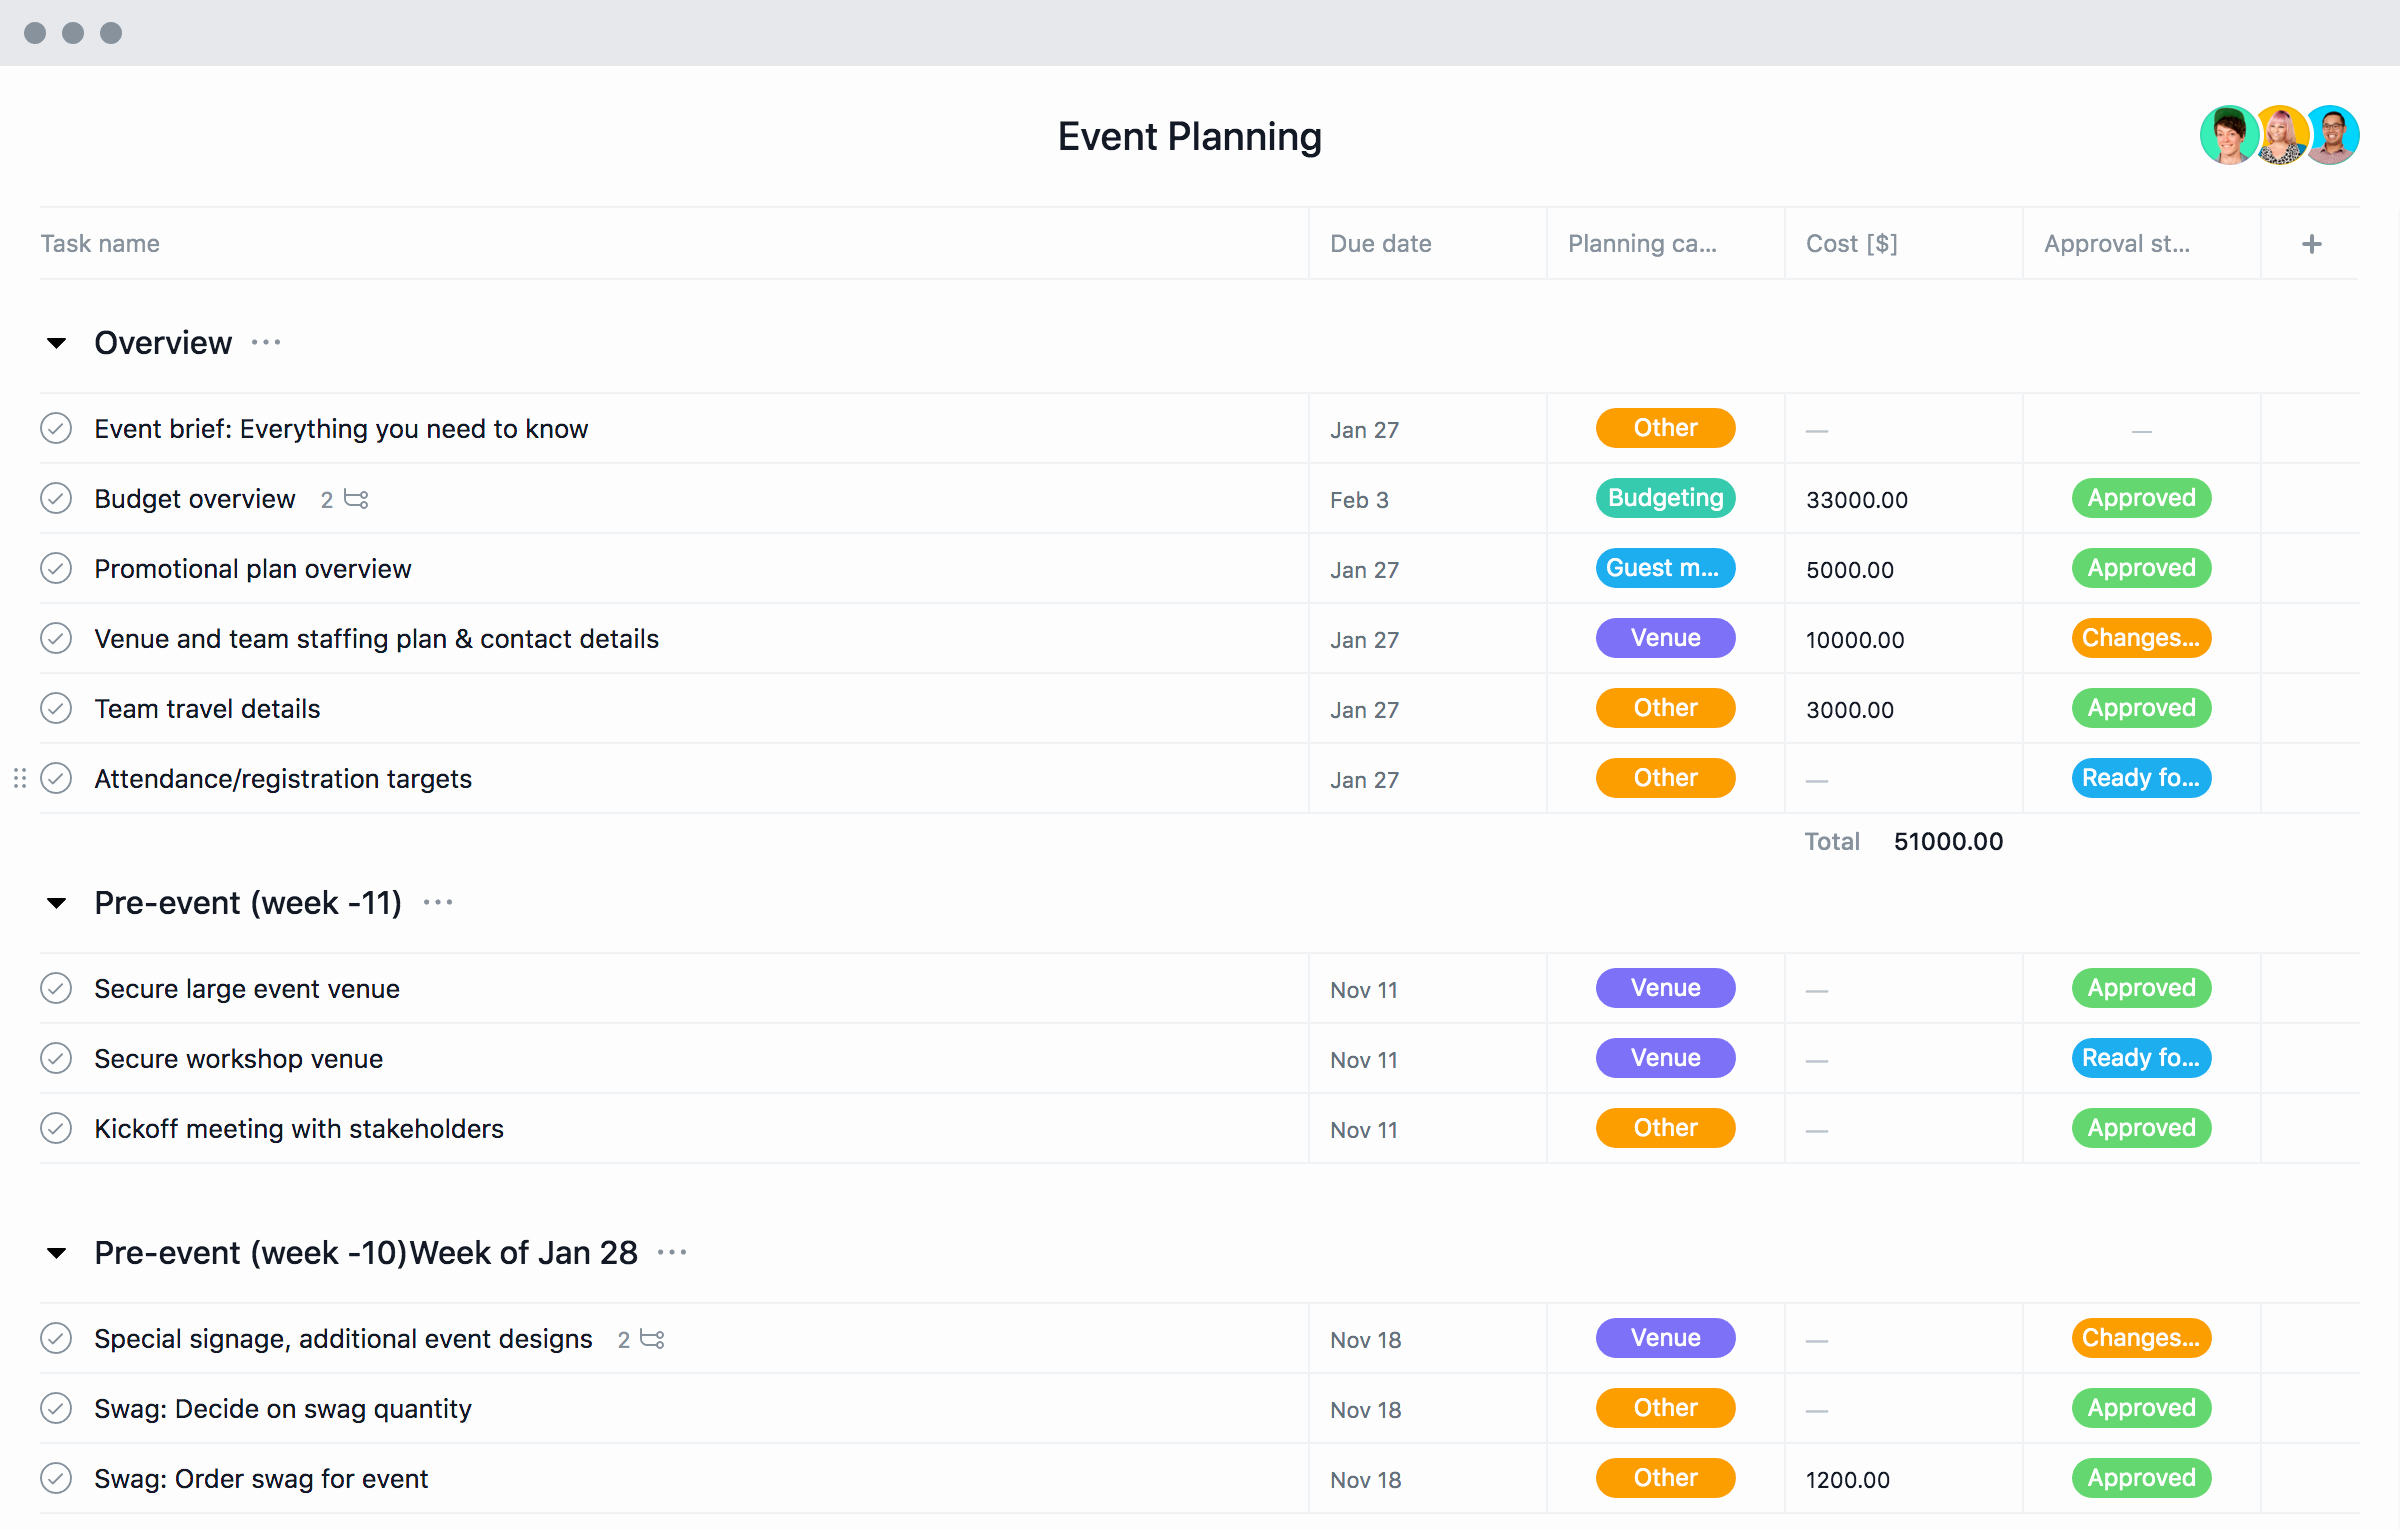 Event Planning Timeline Template New event Planning Template with Checklists and Timeline · asana